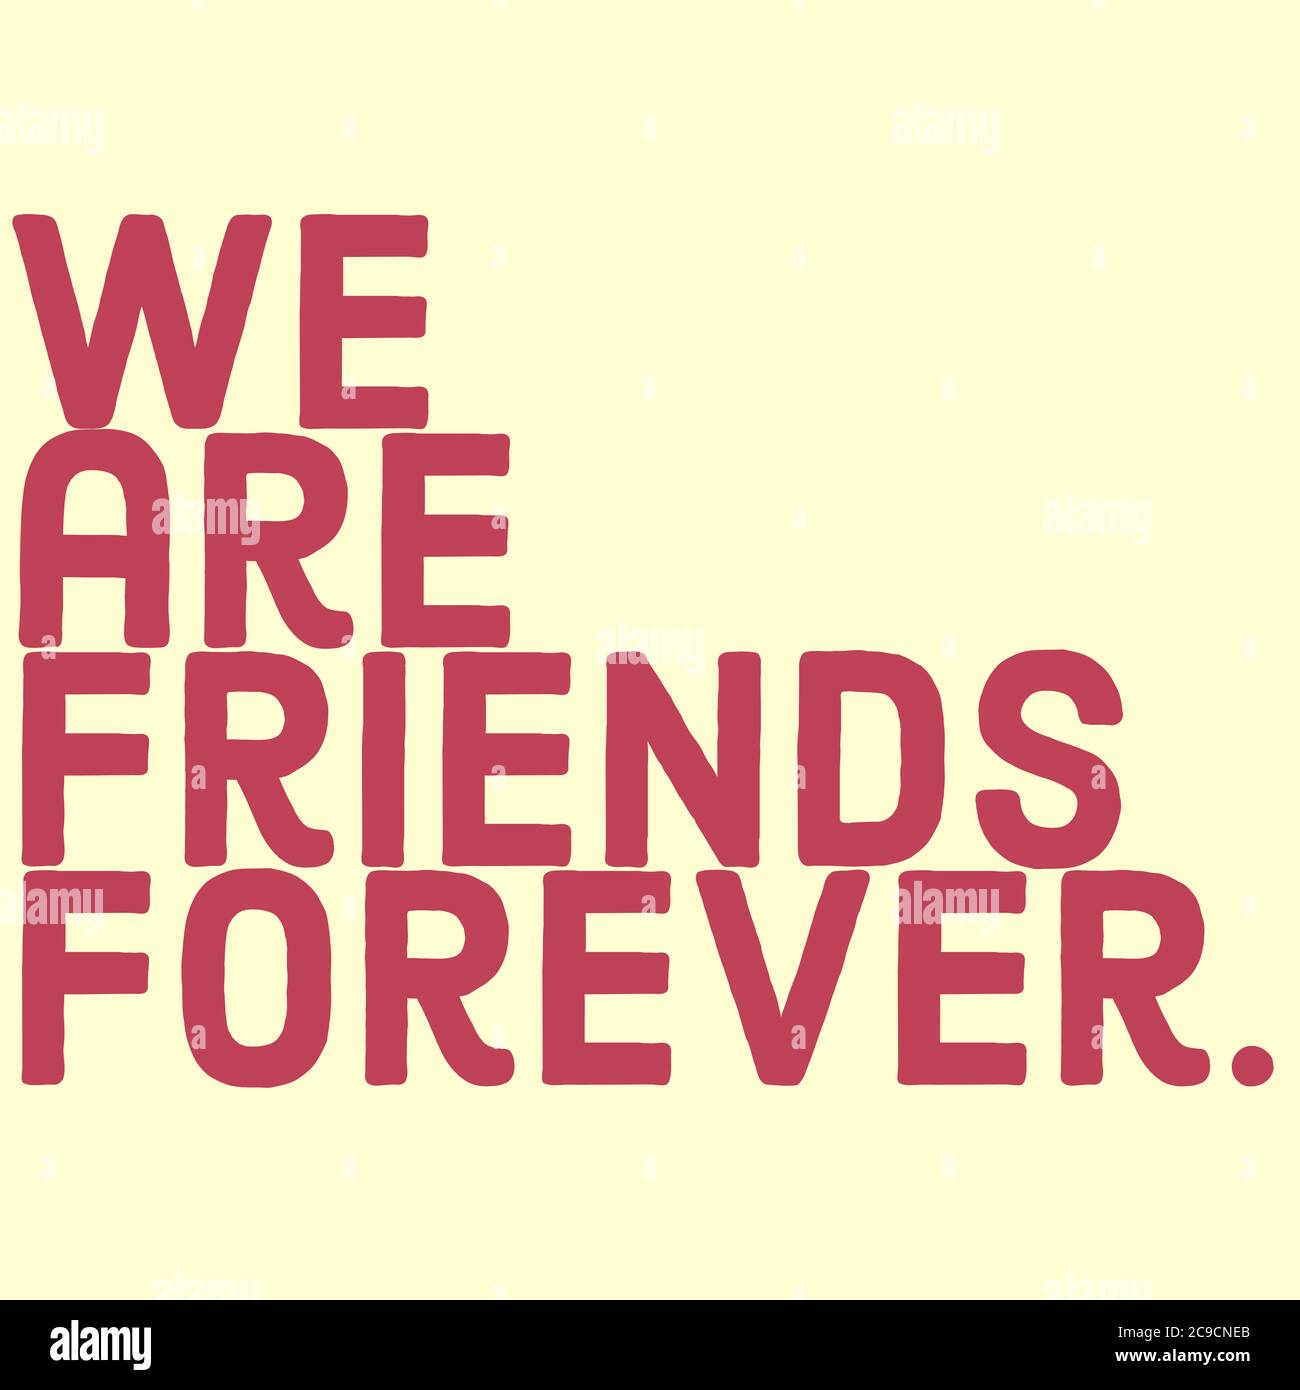 WE ARE FRIENDS FOREVER illustration. Friendship quote rendering ...